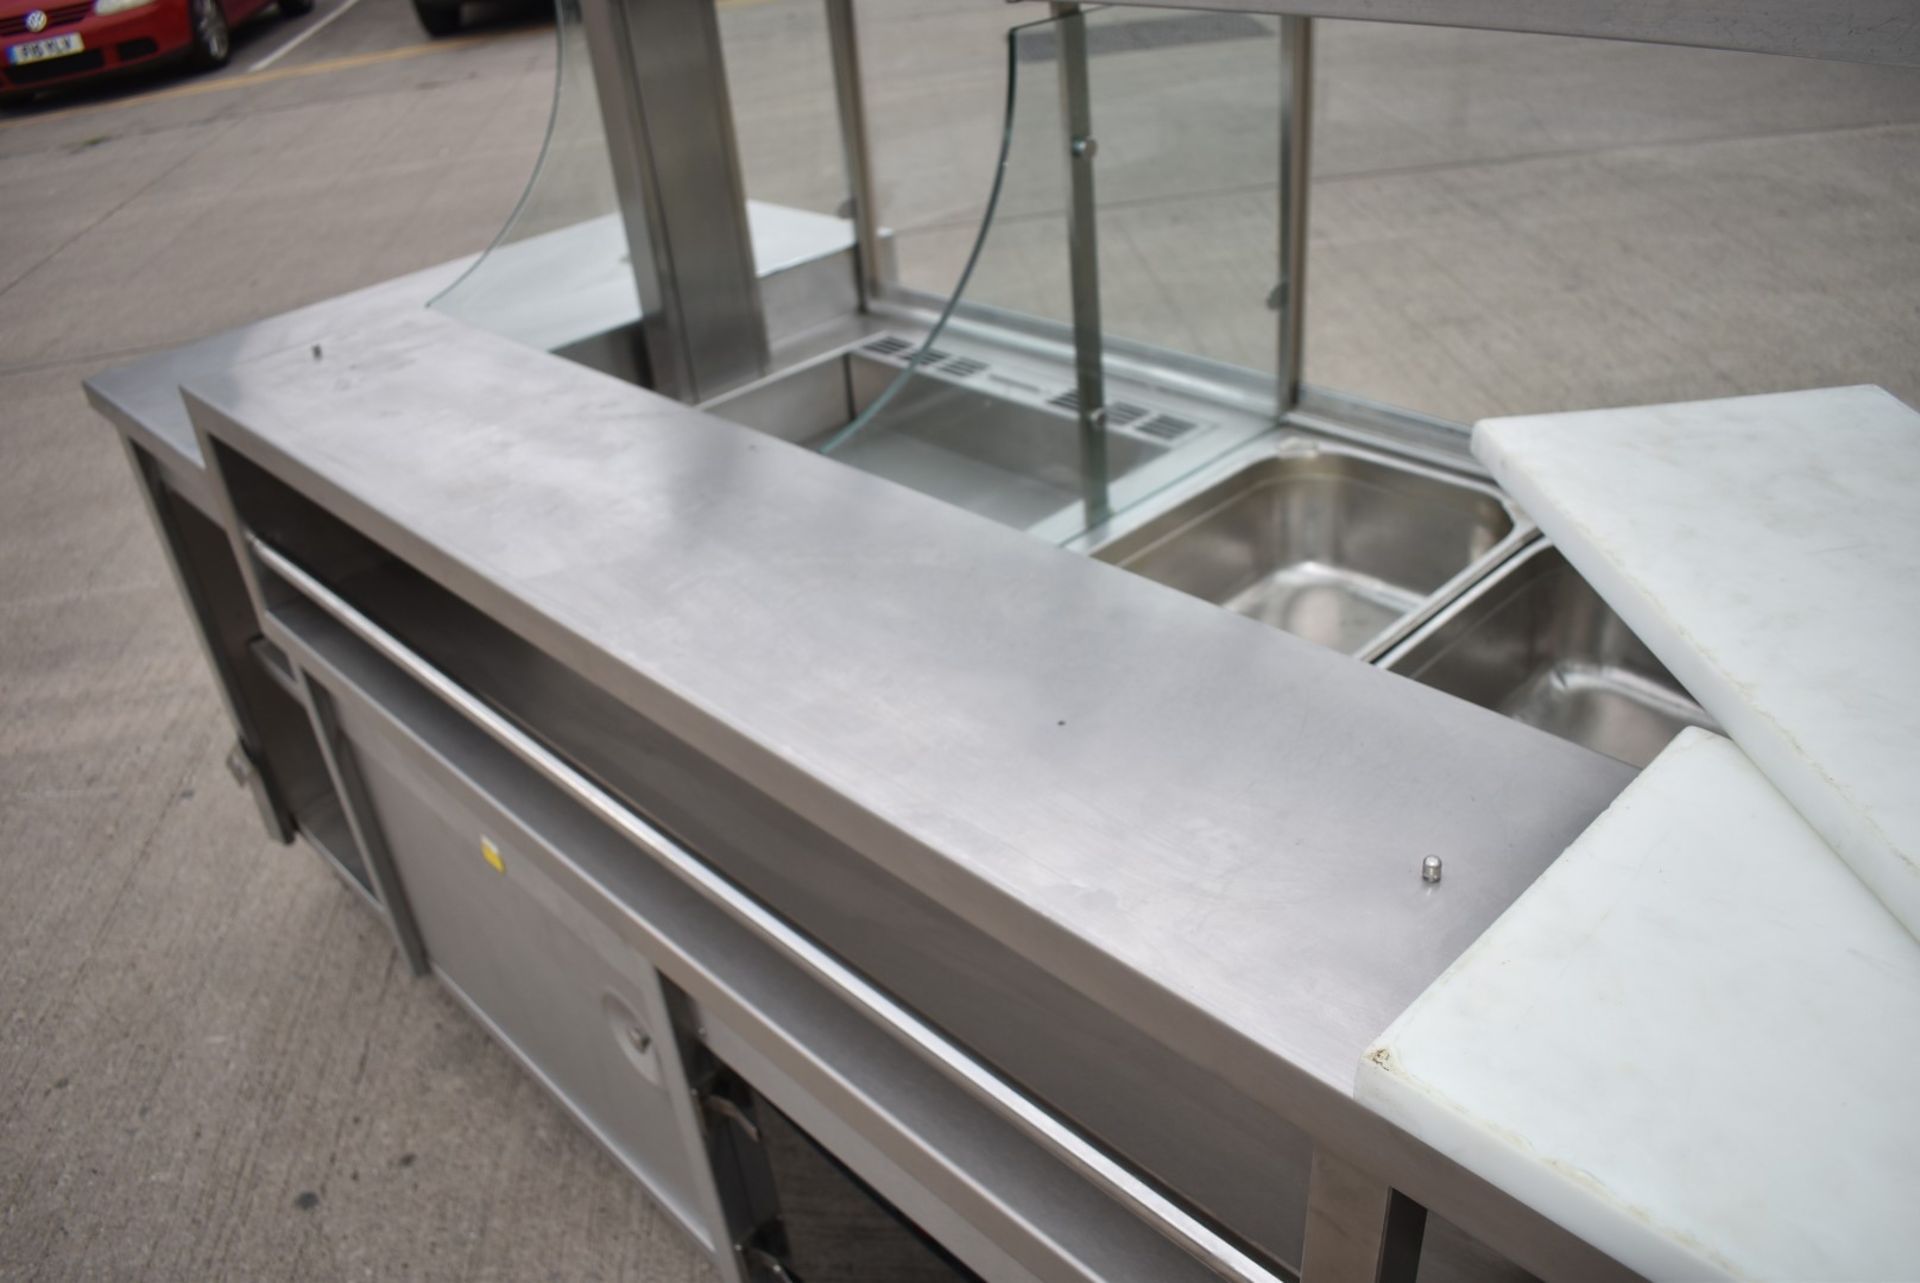 1 x Promart Heated Retail Counter For Take Aways, Hot Food Retail Stores or Canteens etc - - Image 38 of 54